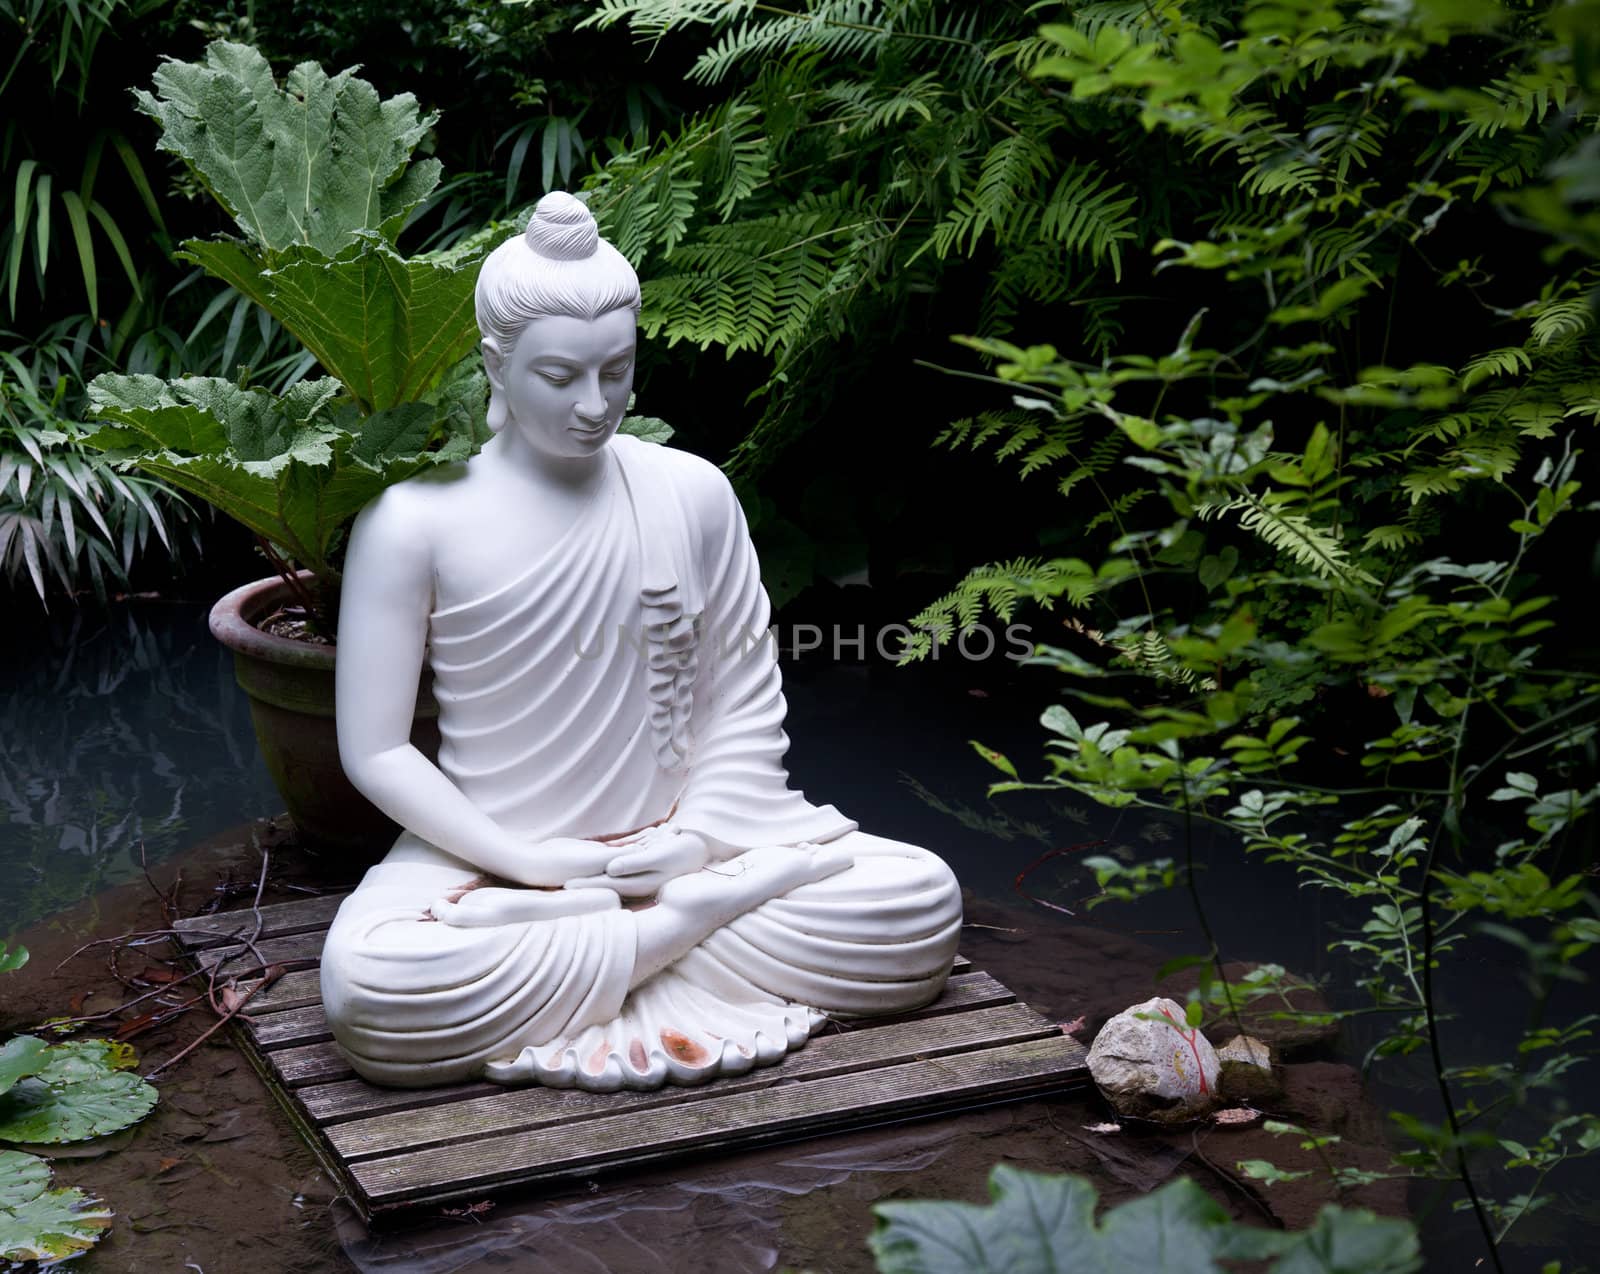 Statue of Buddha on wooden platform in pool surrounded by ferns